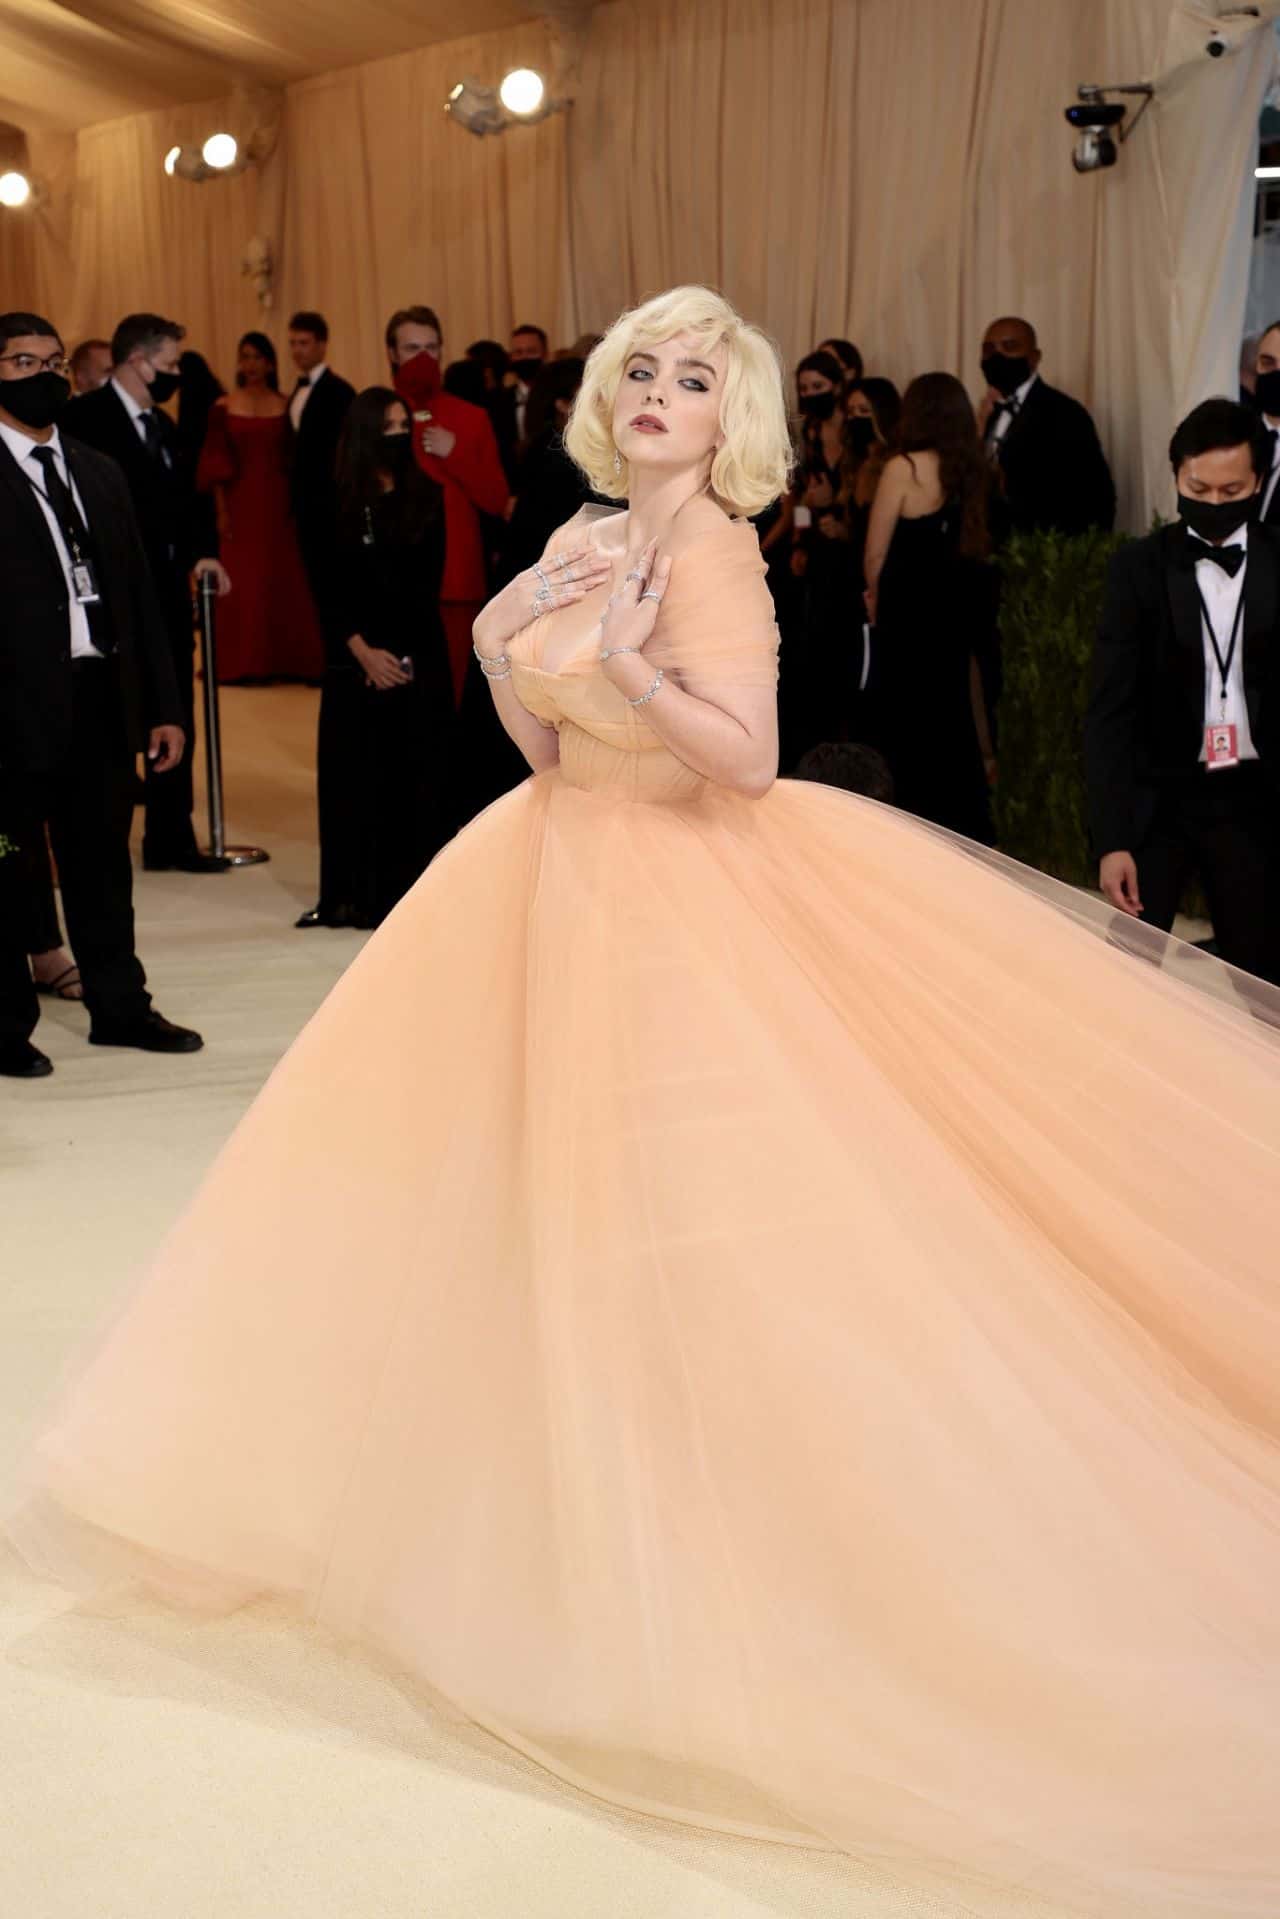 Billie Eilish Amazes All in her Peach-colored Gown at the 2021 Met Gala